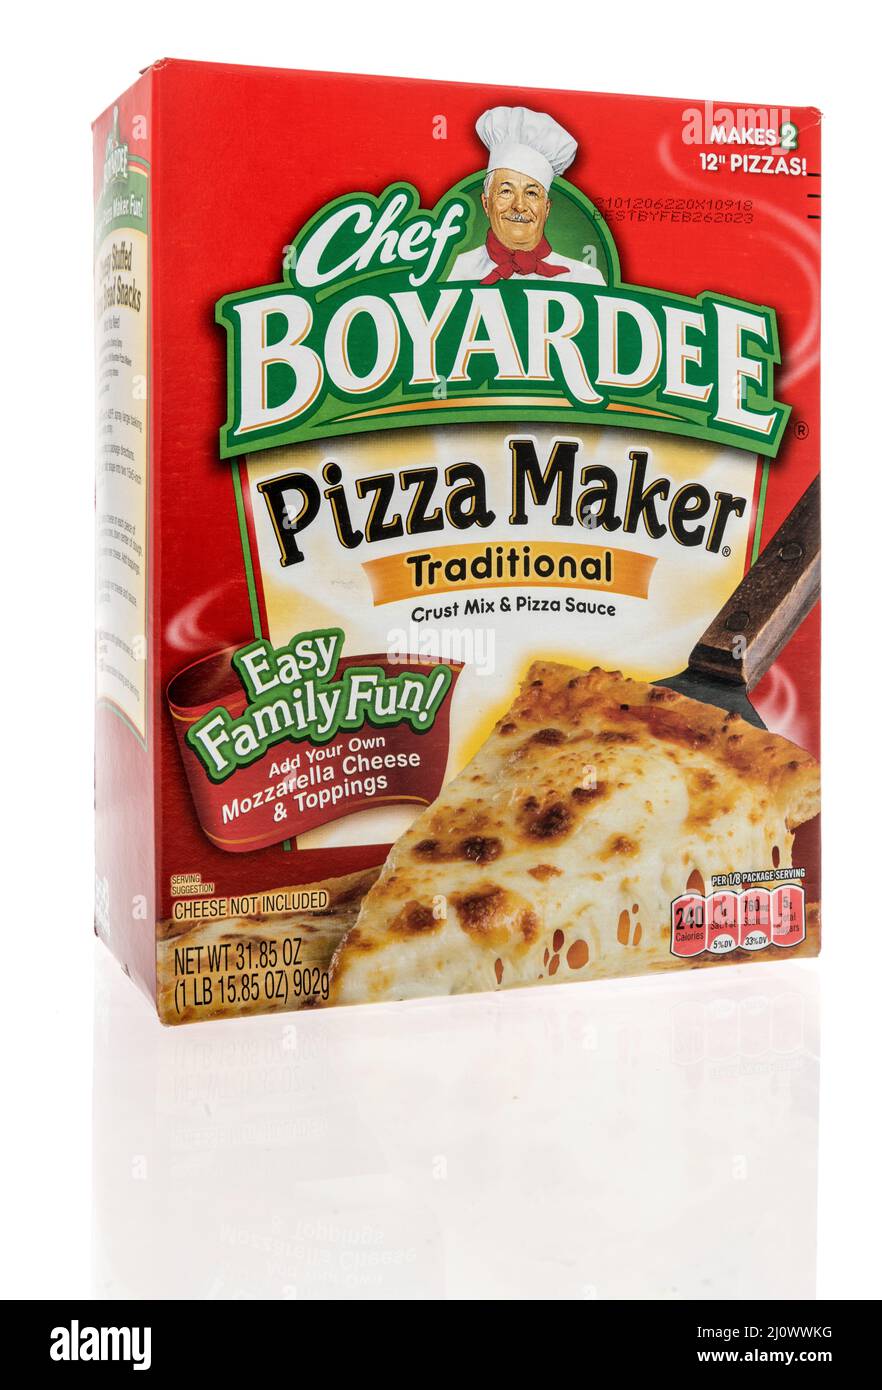 Winneconne, WI -19 March 2021: A package of Chef Boyardee pizza maker crust mix and pizza sauce on an isolated background Stock Photo